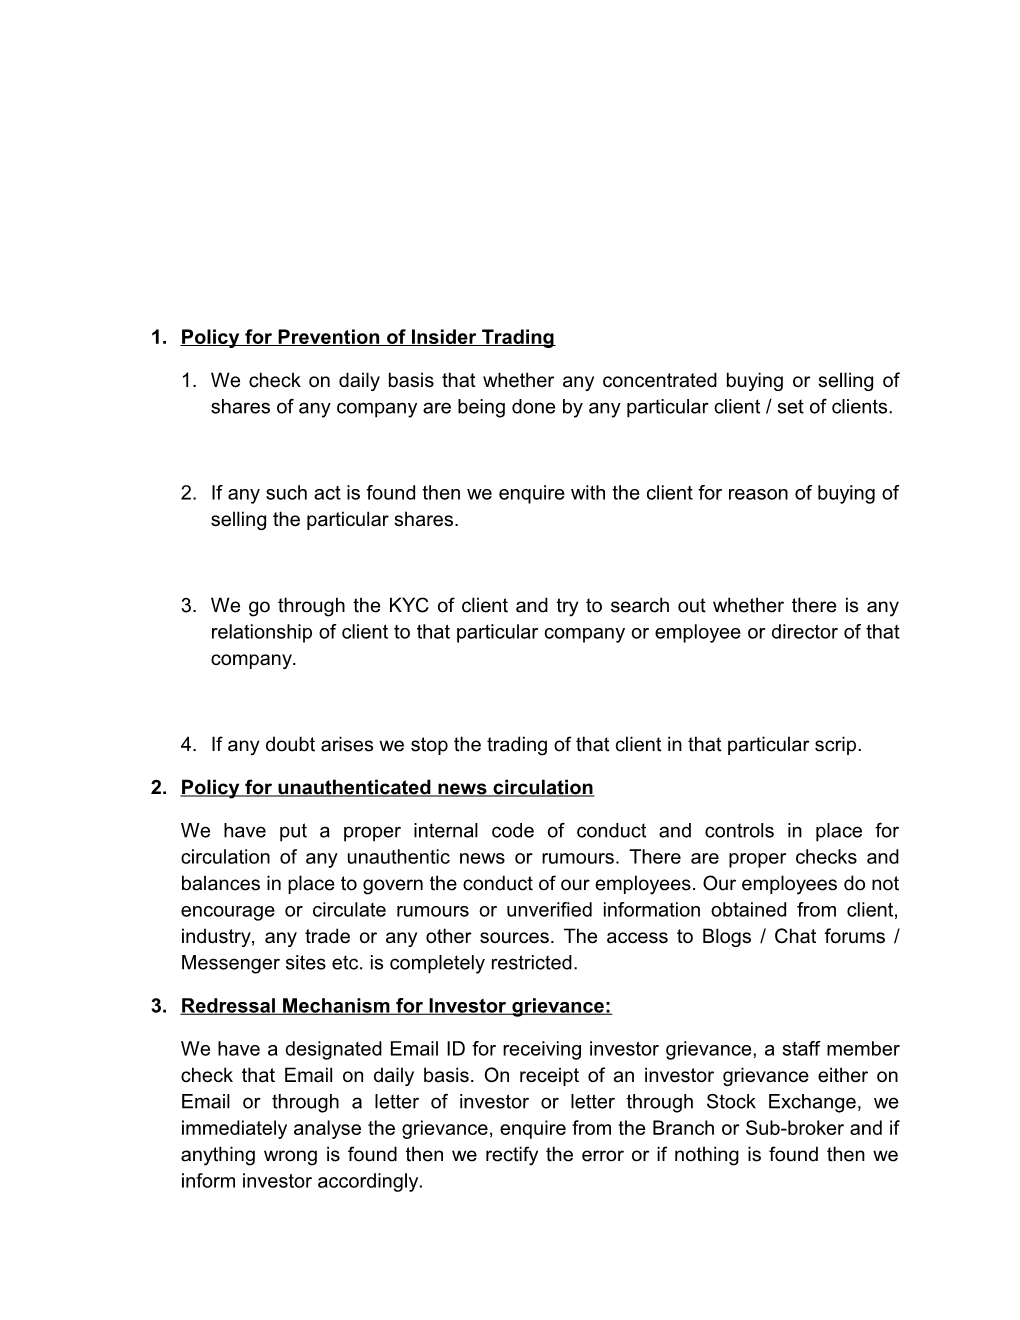 Policy for Prevention of Insider Trading